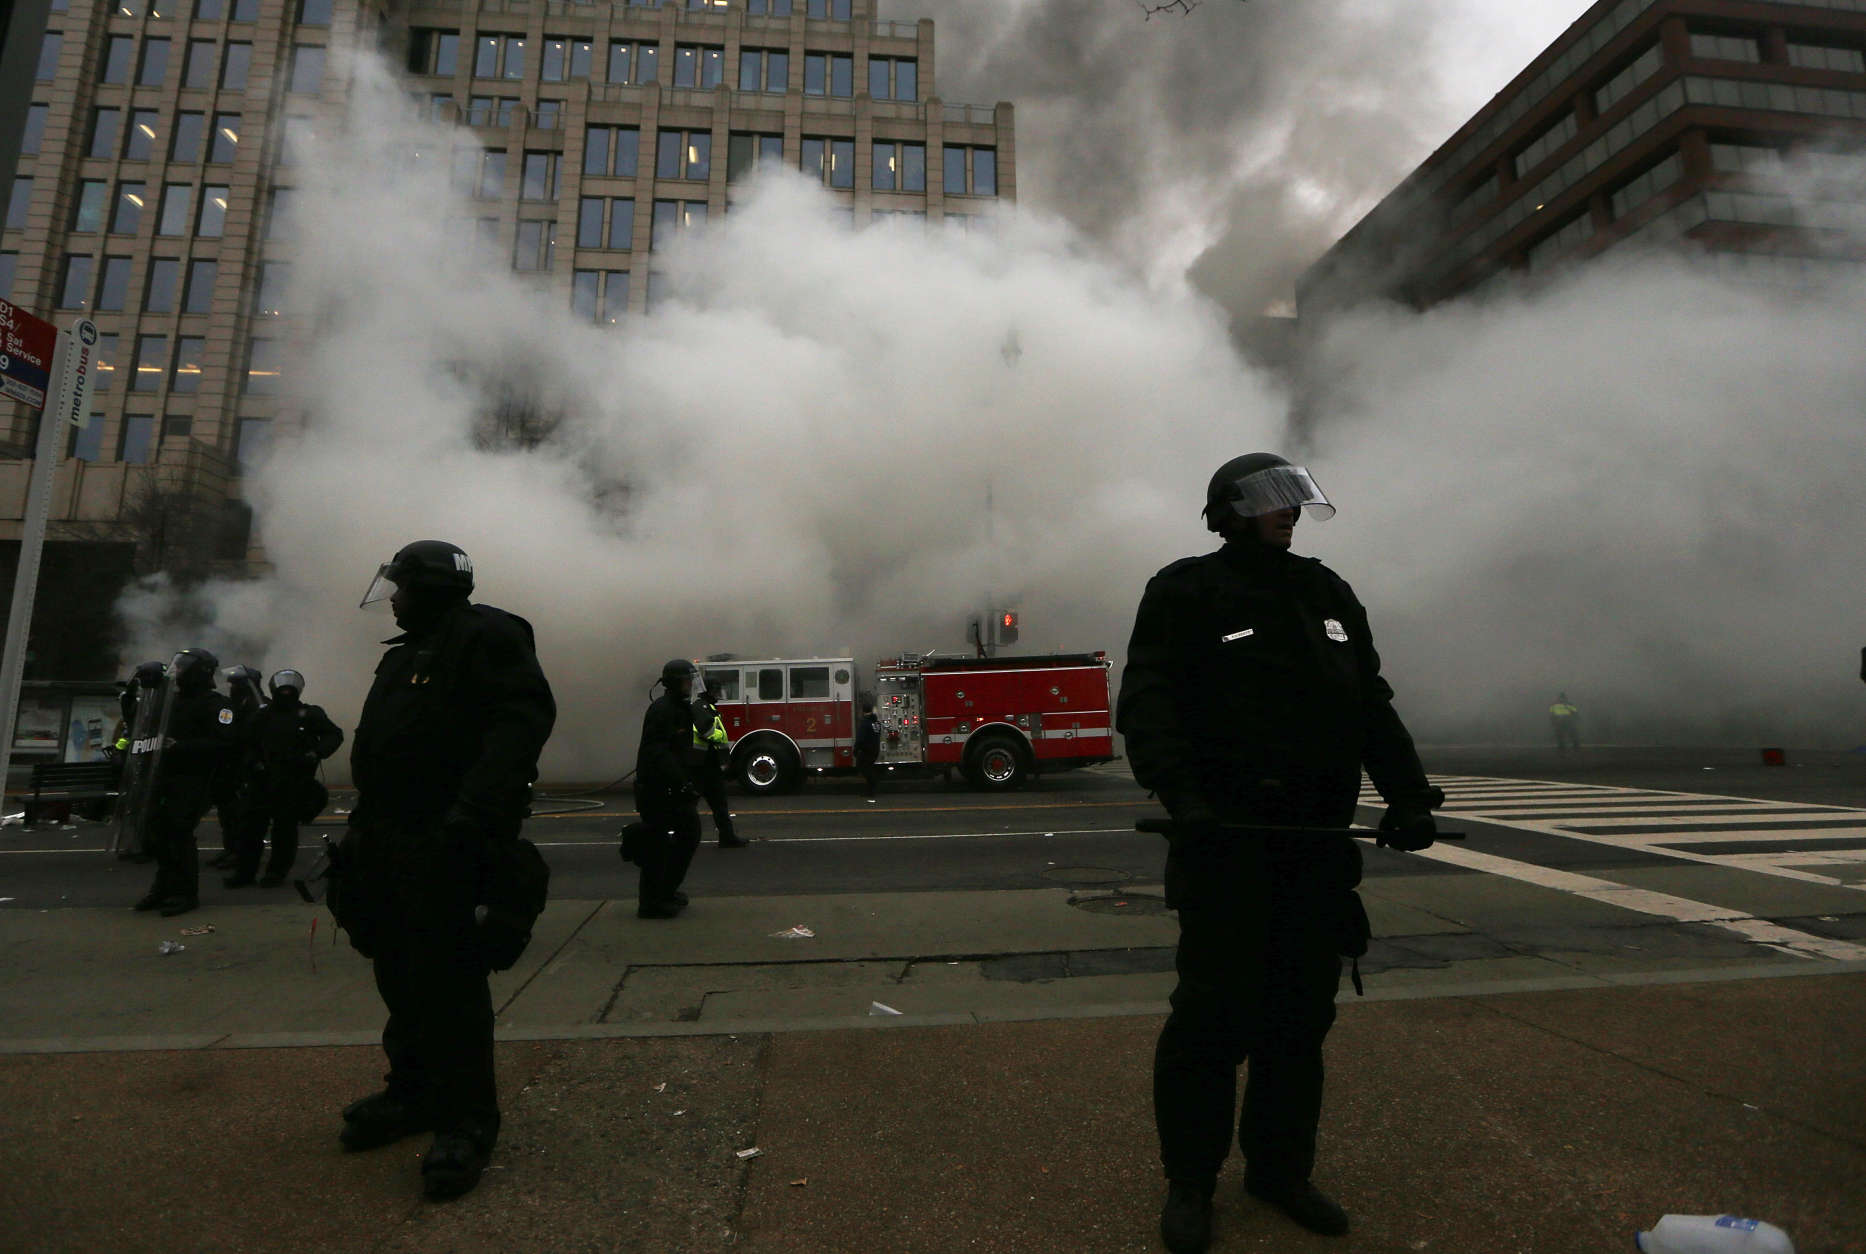 WASHINGTON, DC - JANUARY 20:  Police keep watch as firefighters put out a limousine fire after the vehicle was smashed by anti-Trump protesters on K Street on January 20, 2017 in Washington, DC. While protests were mostly peaceful, some turned violent. President-elect Donald Trump was sworn-in as the 45th U.S. President today.  (Photo by Mario Tama/Getty Images)